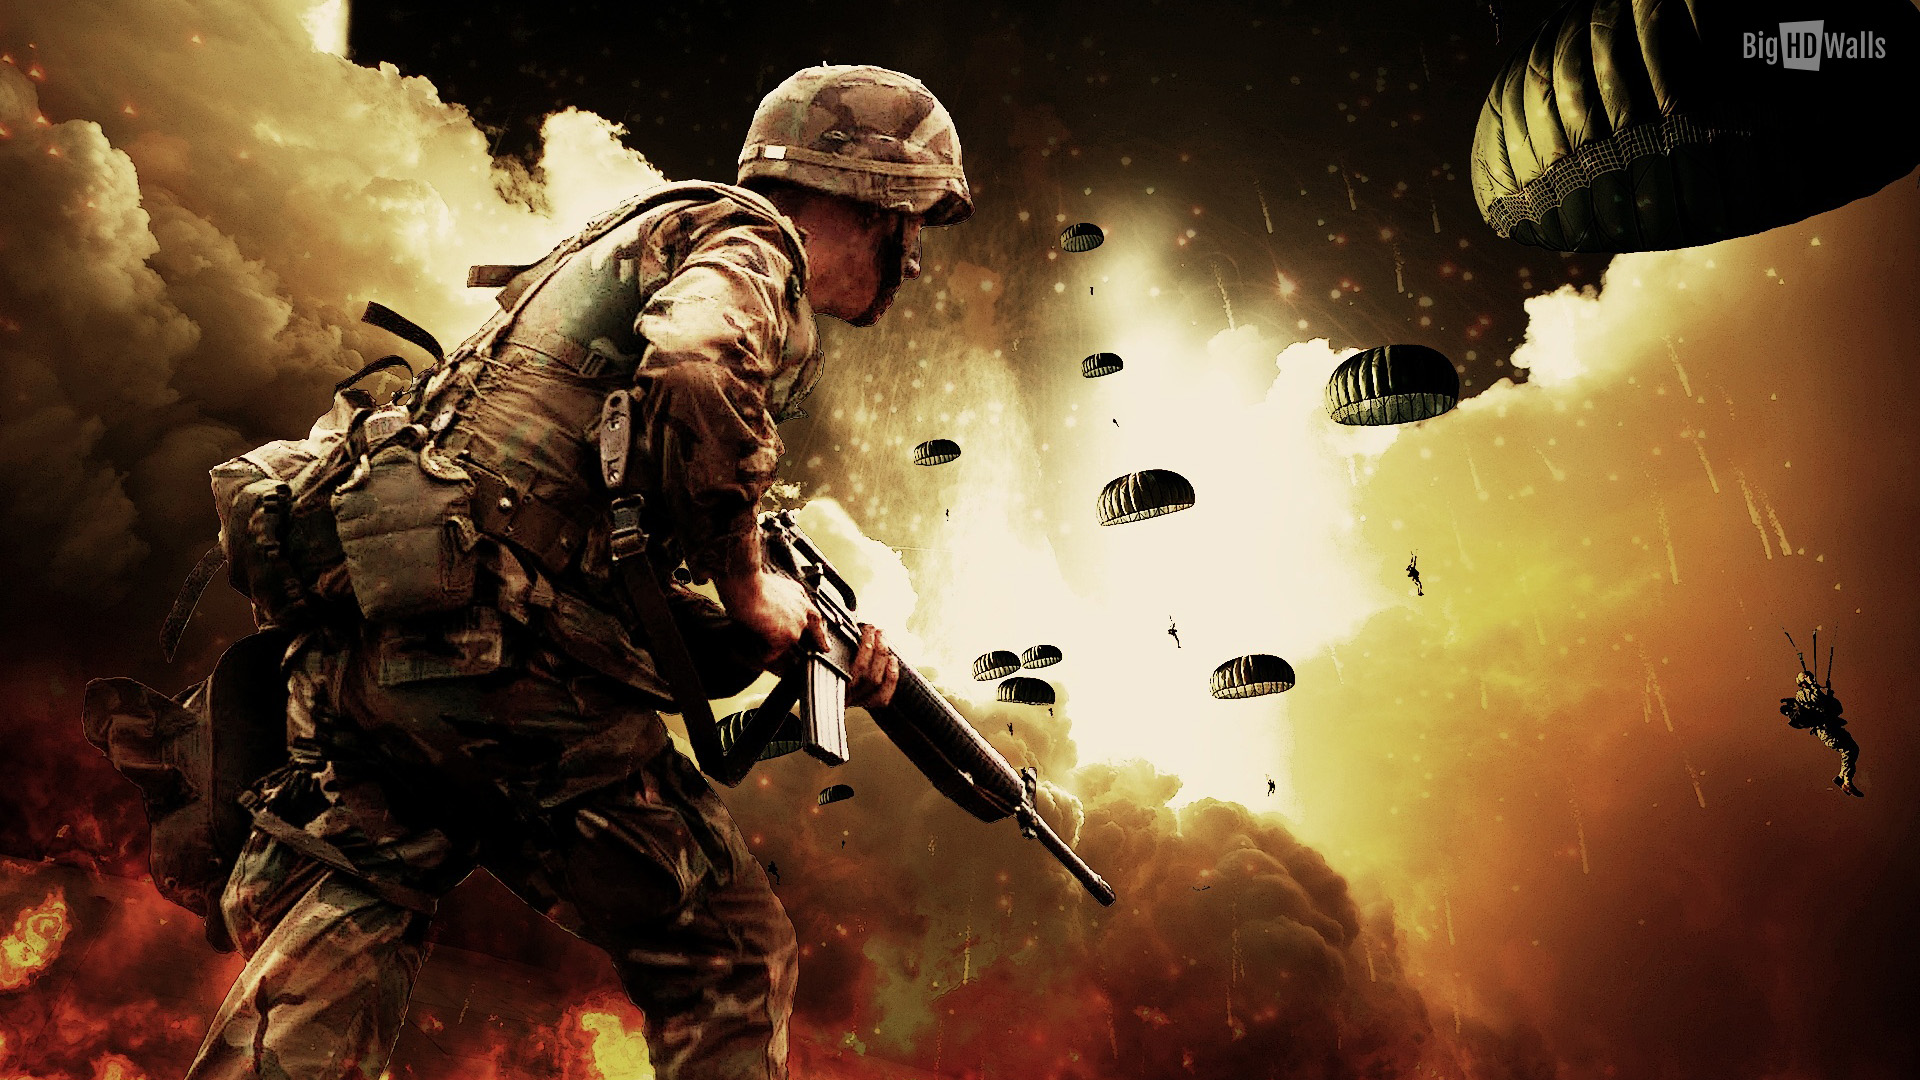 Below Are Awesome Action Wallpaper About Military And Defense